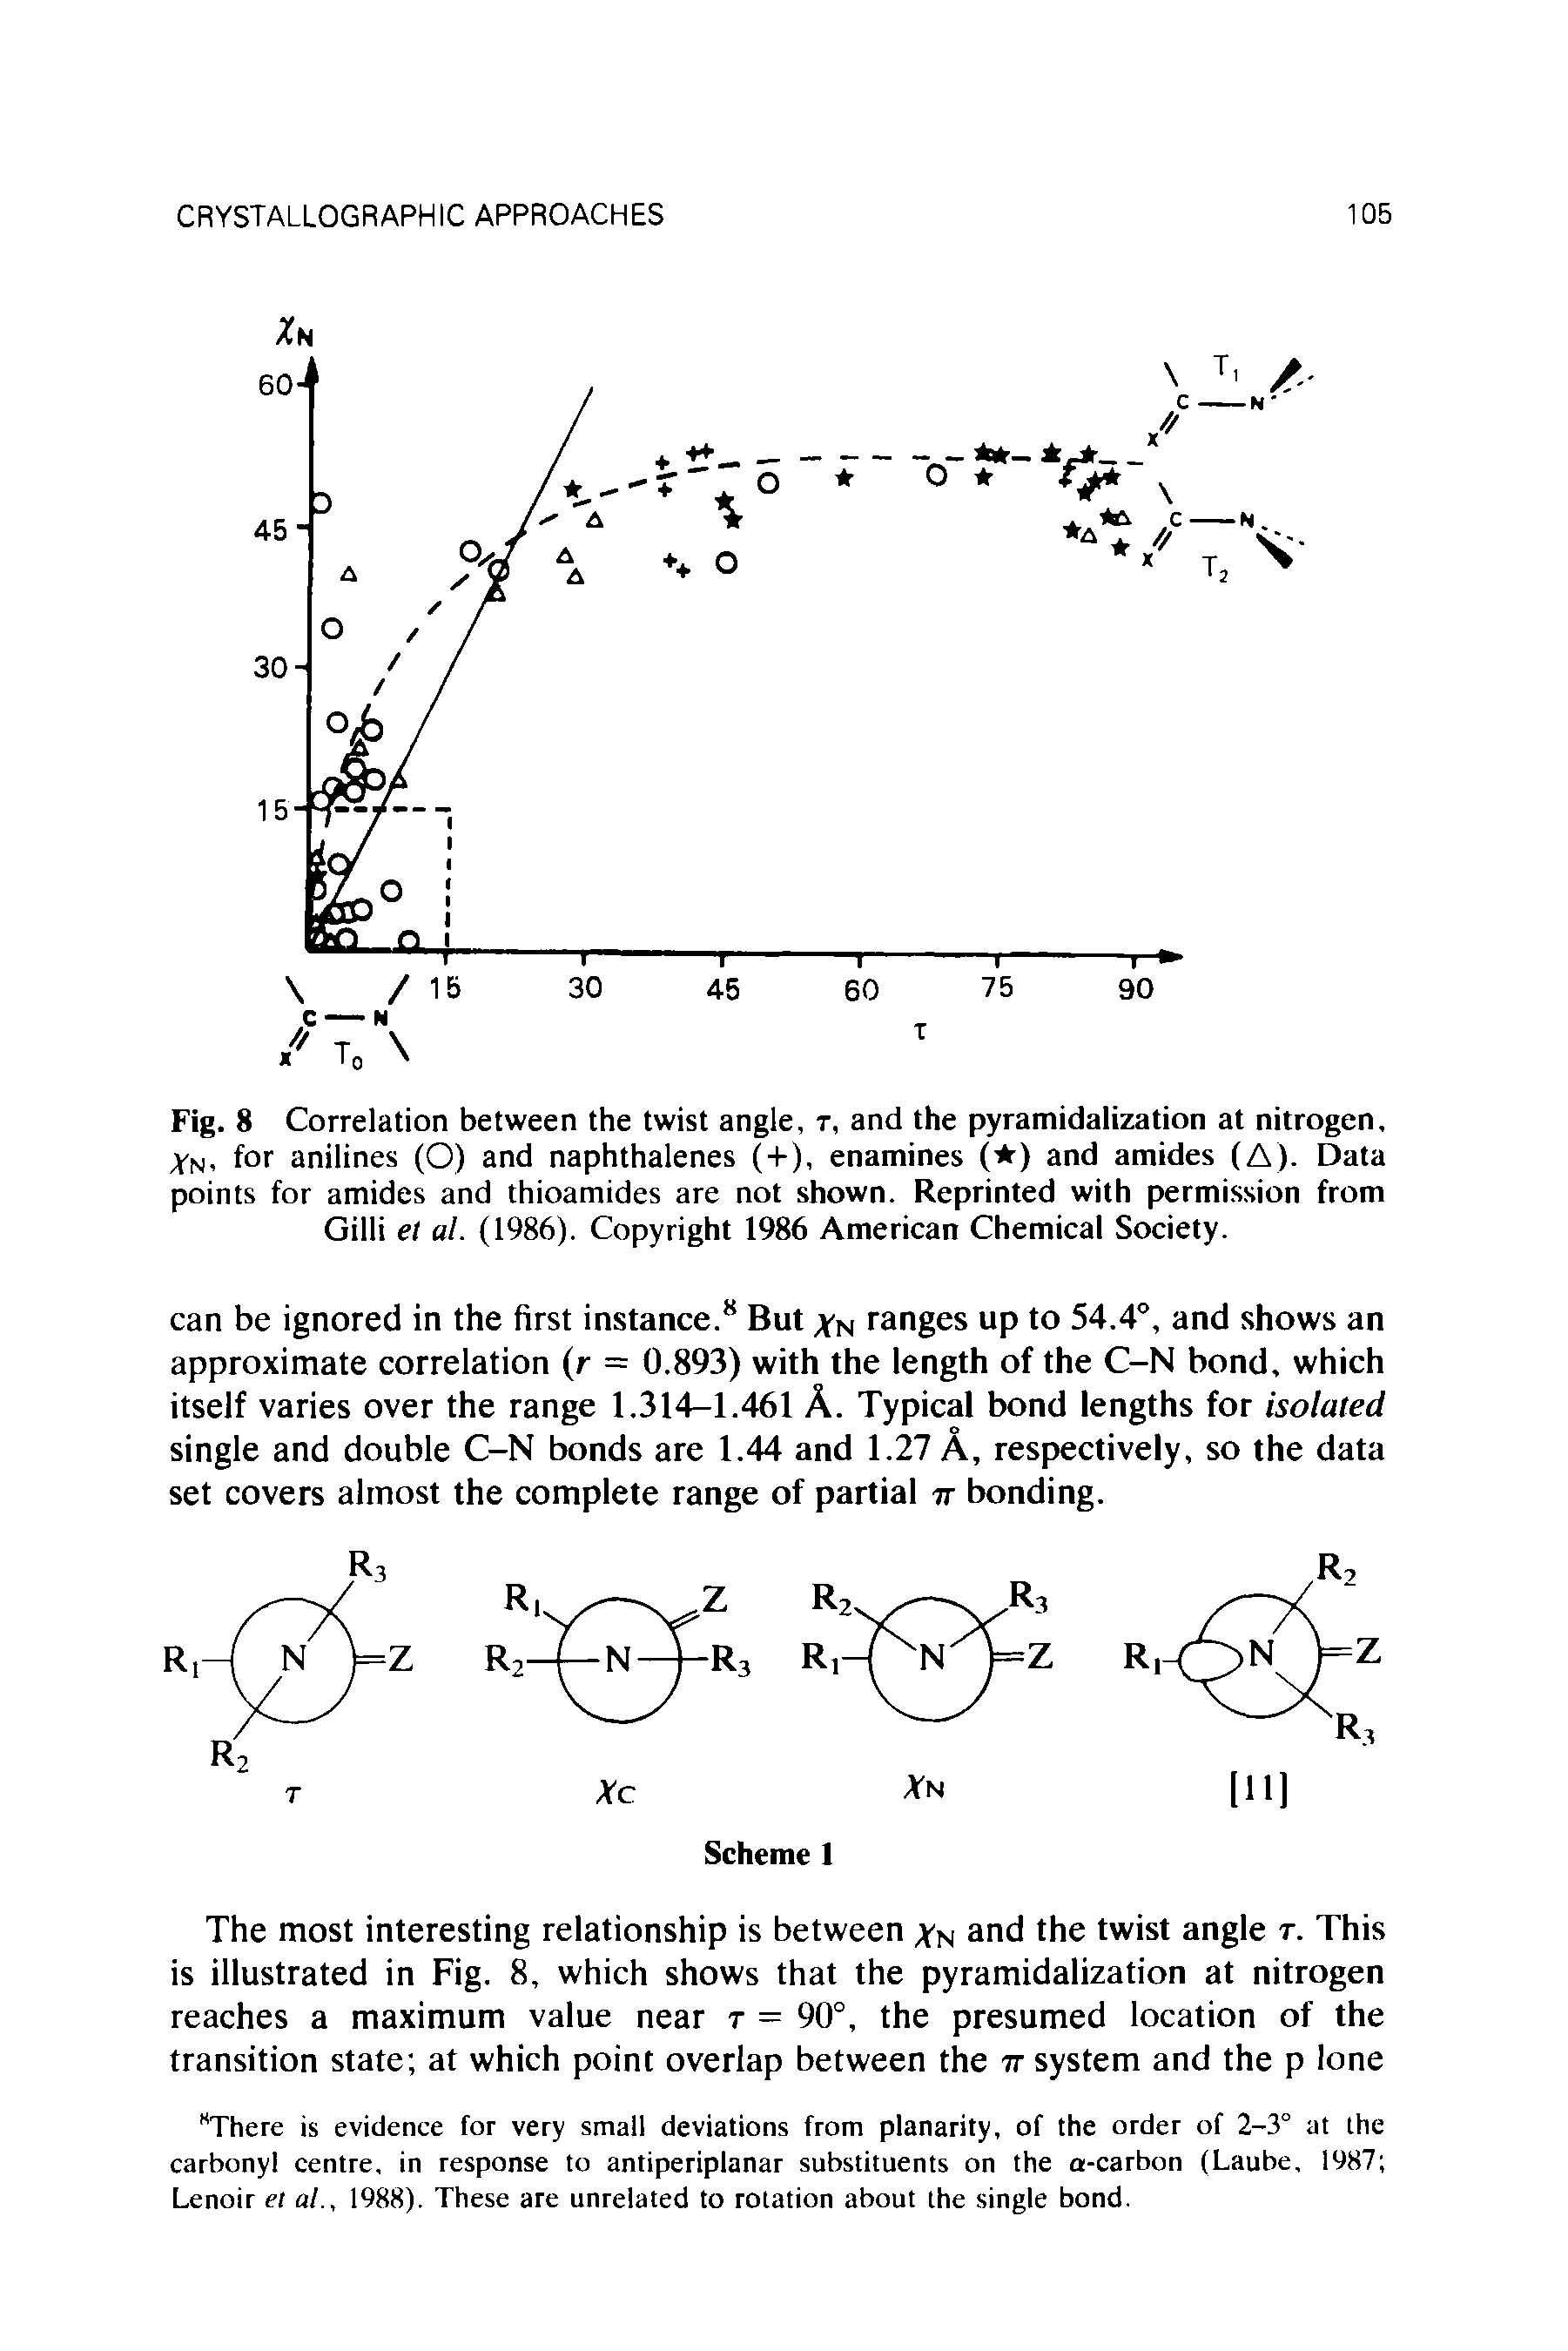 Fig. 8 Correlation between the twist angle, t, and the pyramidalization at nitrogen, yN, for anilines (O) and naphthalenes (+), enamines ( ) and amides (A). Data points for amides and thioamides are not shown. Reprinted with permission from Gilli et ul. (1986). Copyright 1986 American Chemical Society.